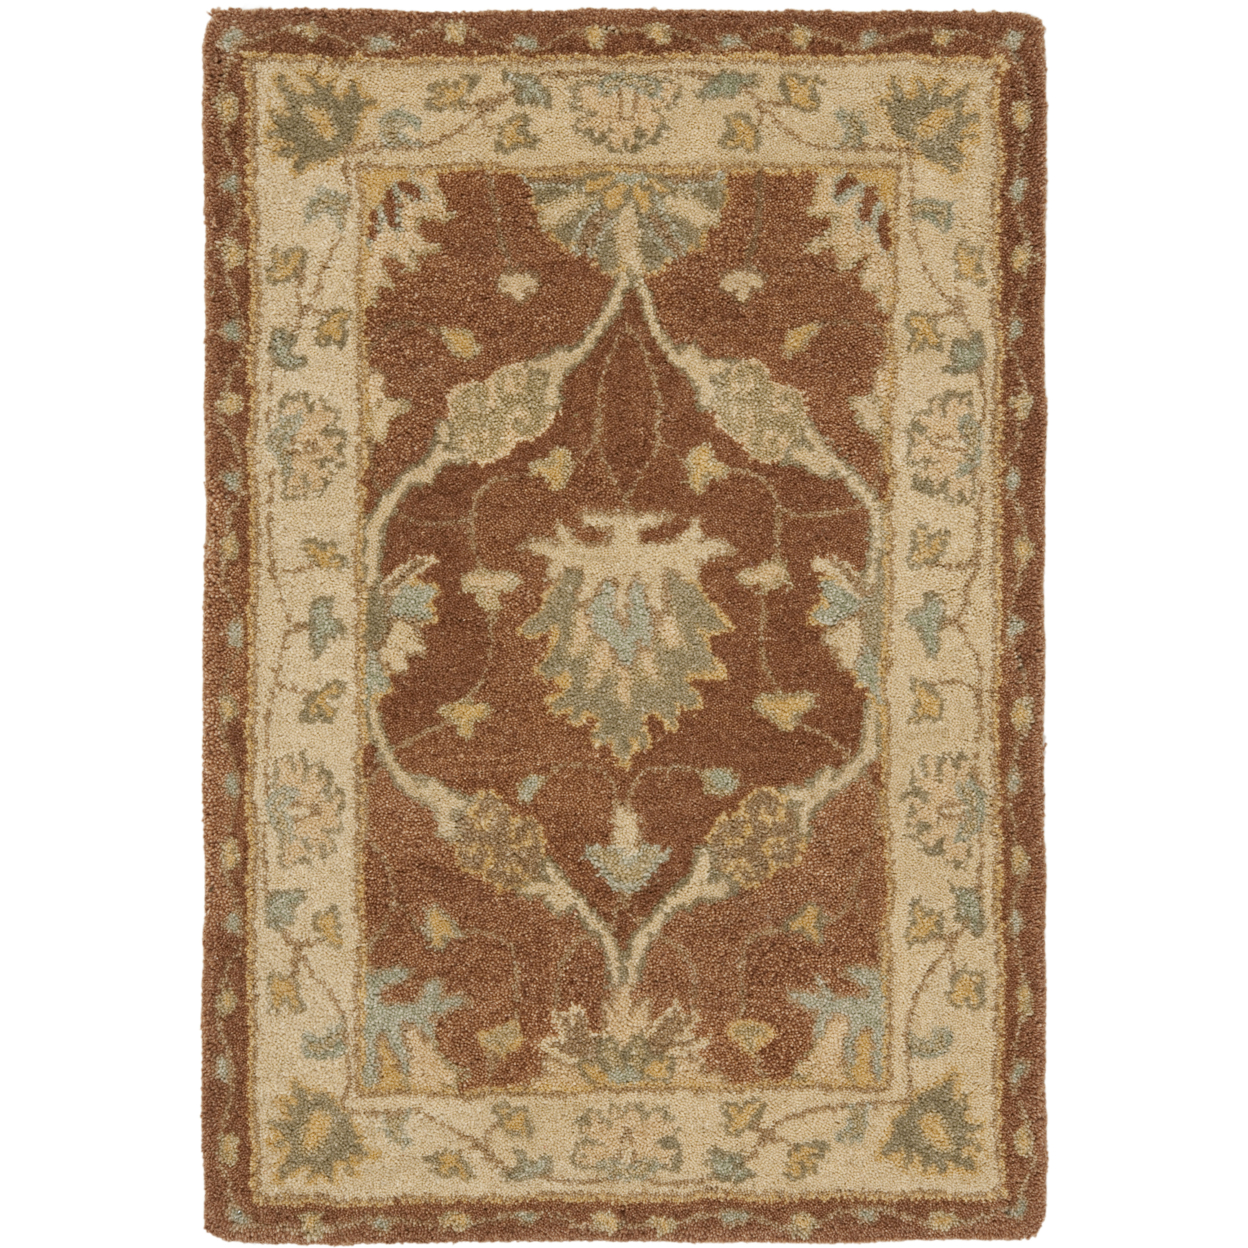 SAFAVIEH Antiquity AT315A Handmade Brown / Taupe Rug - 2' 3 X 8'